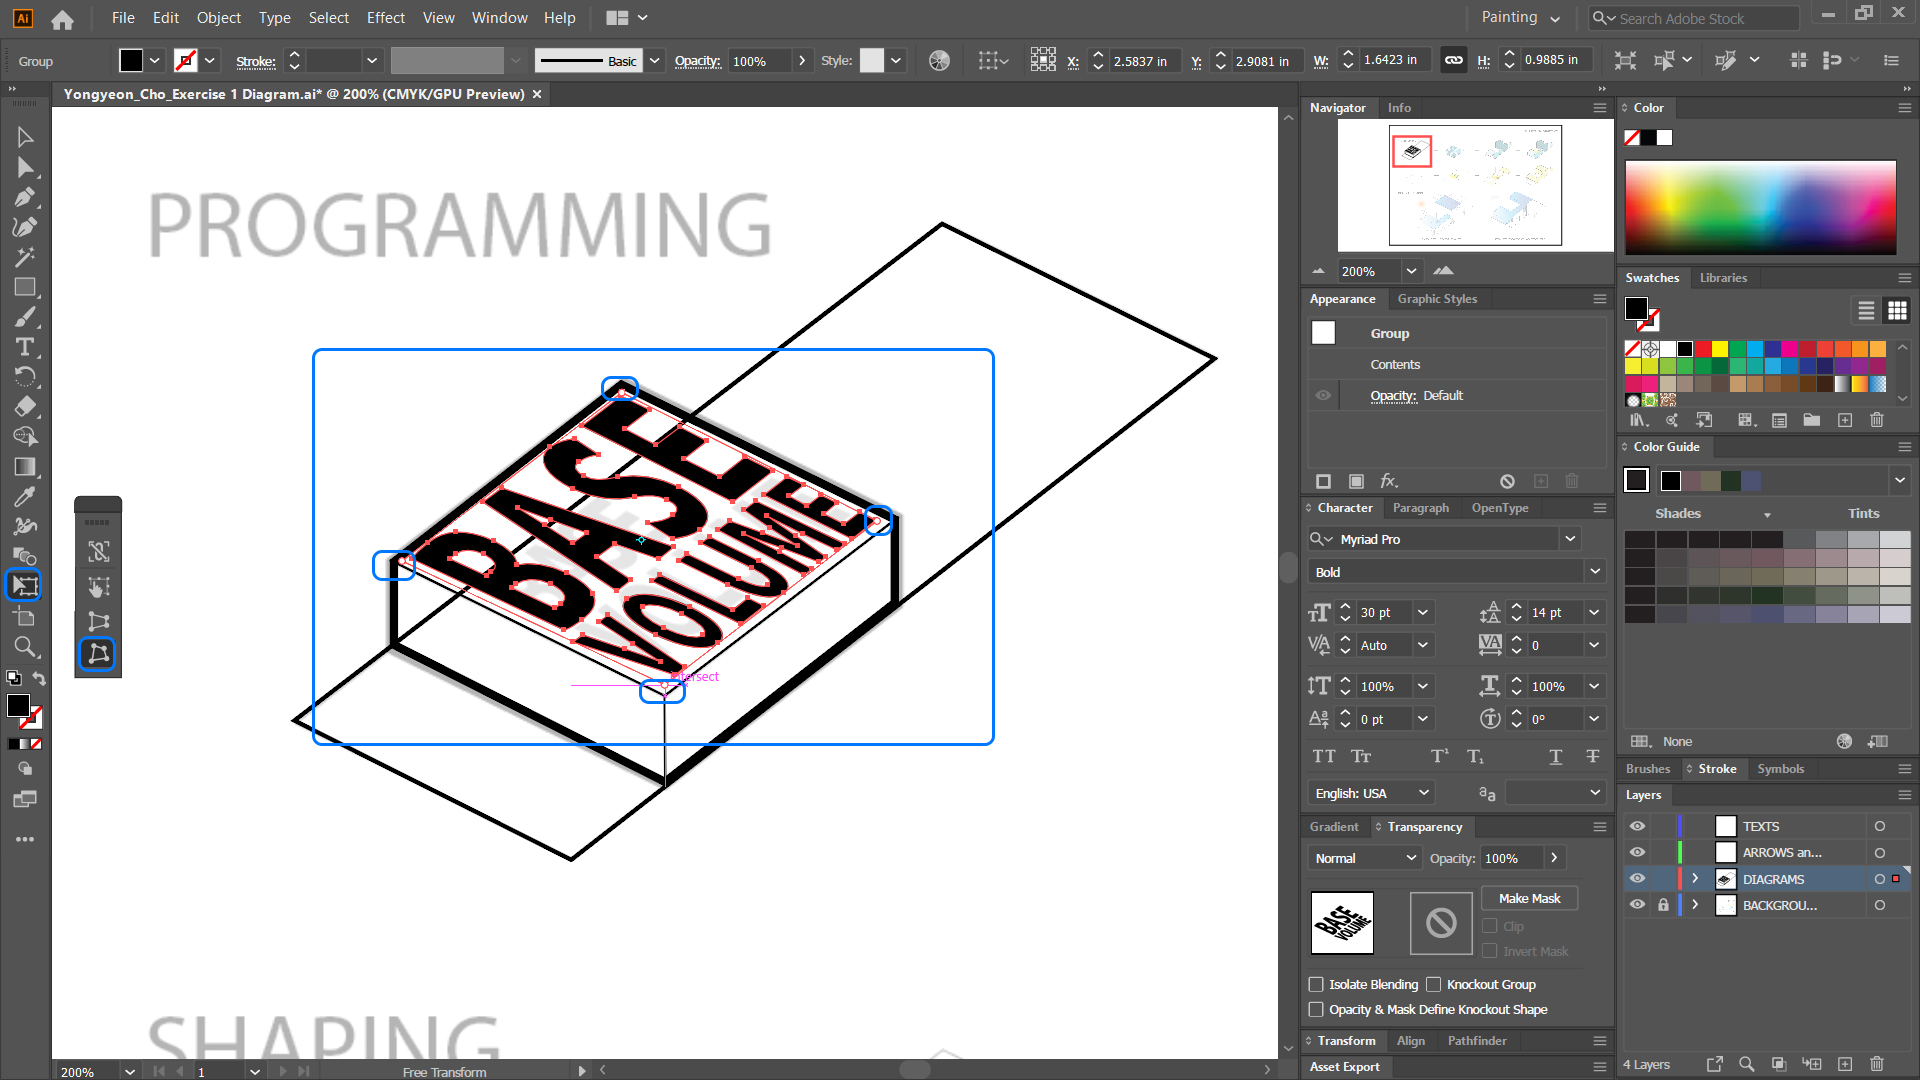 It indicates how to edit the text to align with the perspective view using free transform tool.